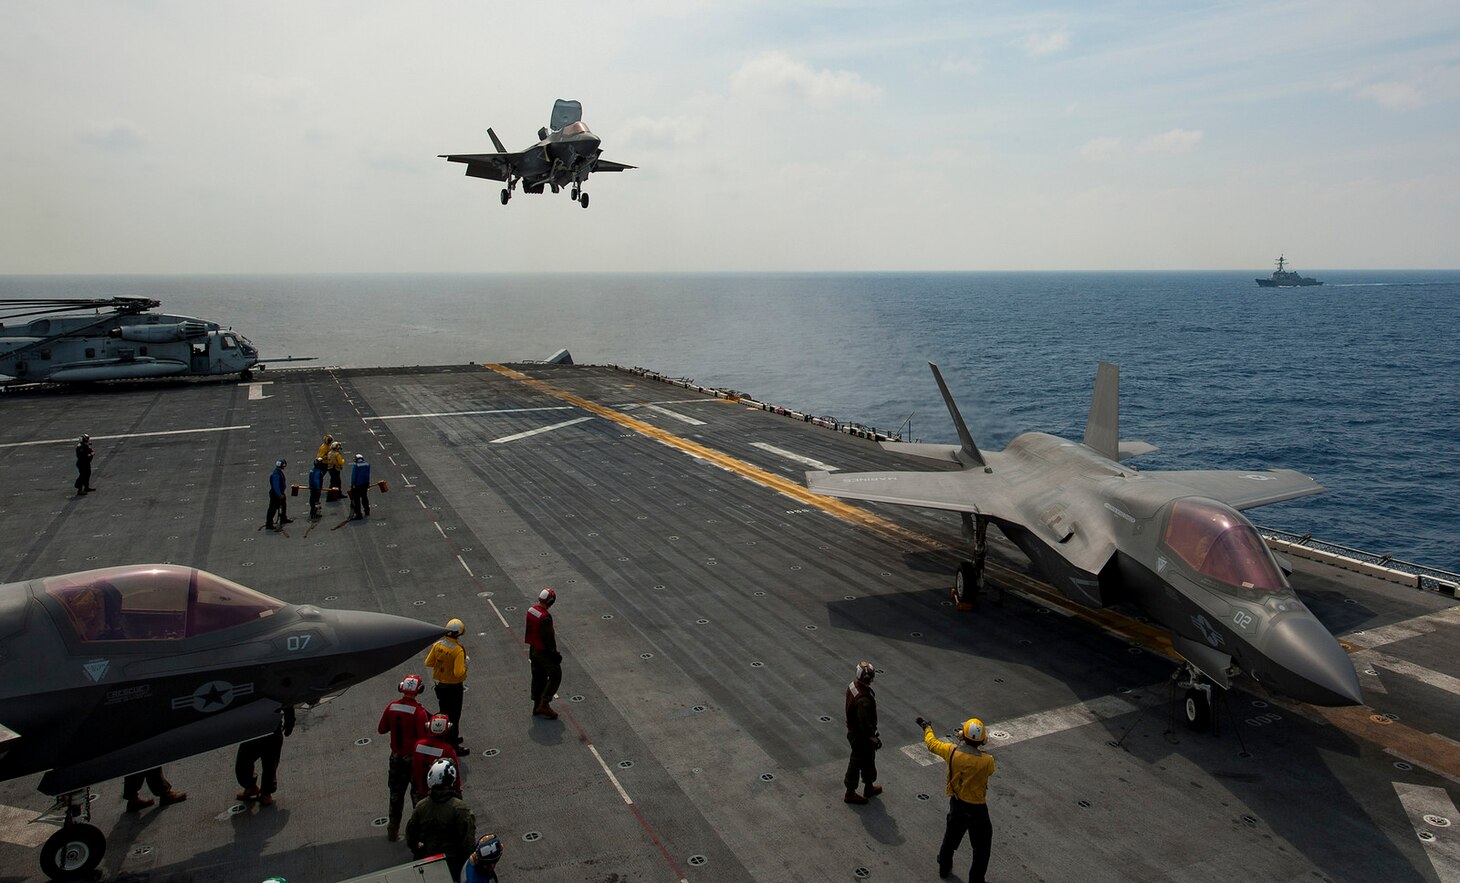 USS Wasp Completes Historic Patrol in Indo-Pacific